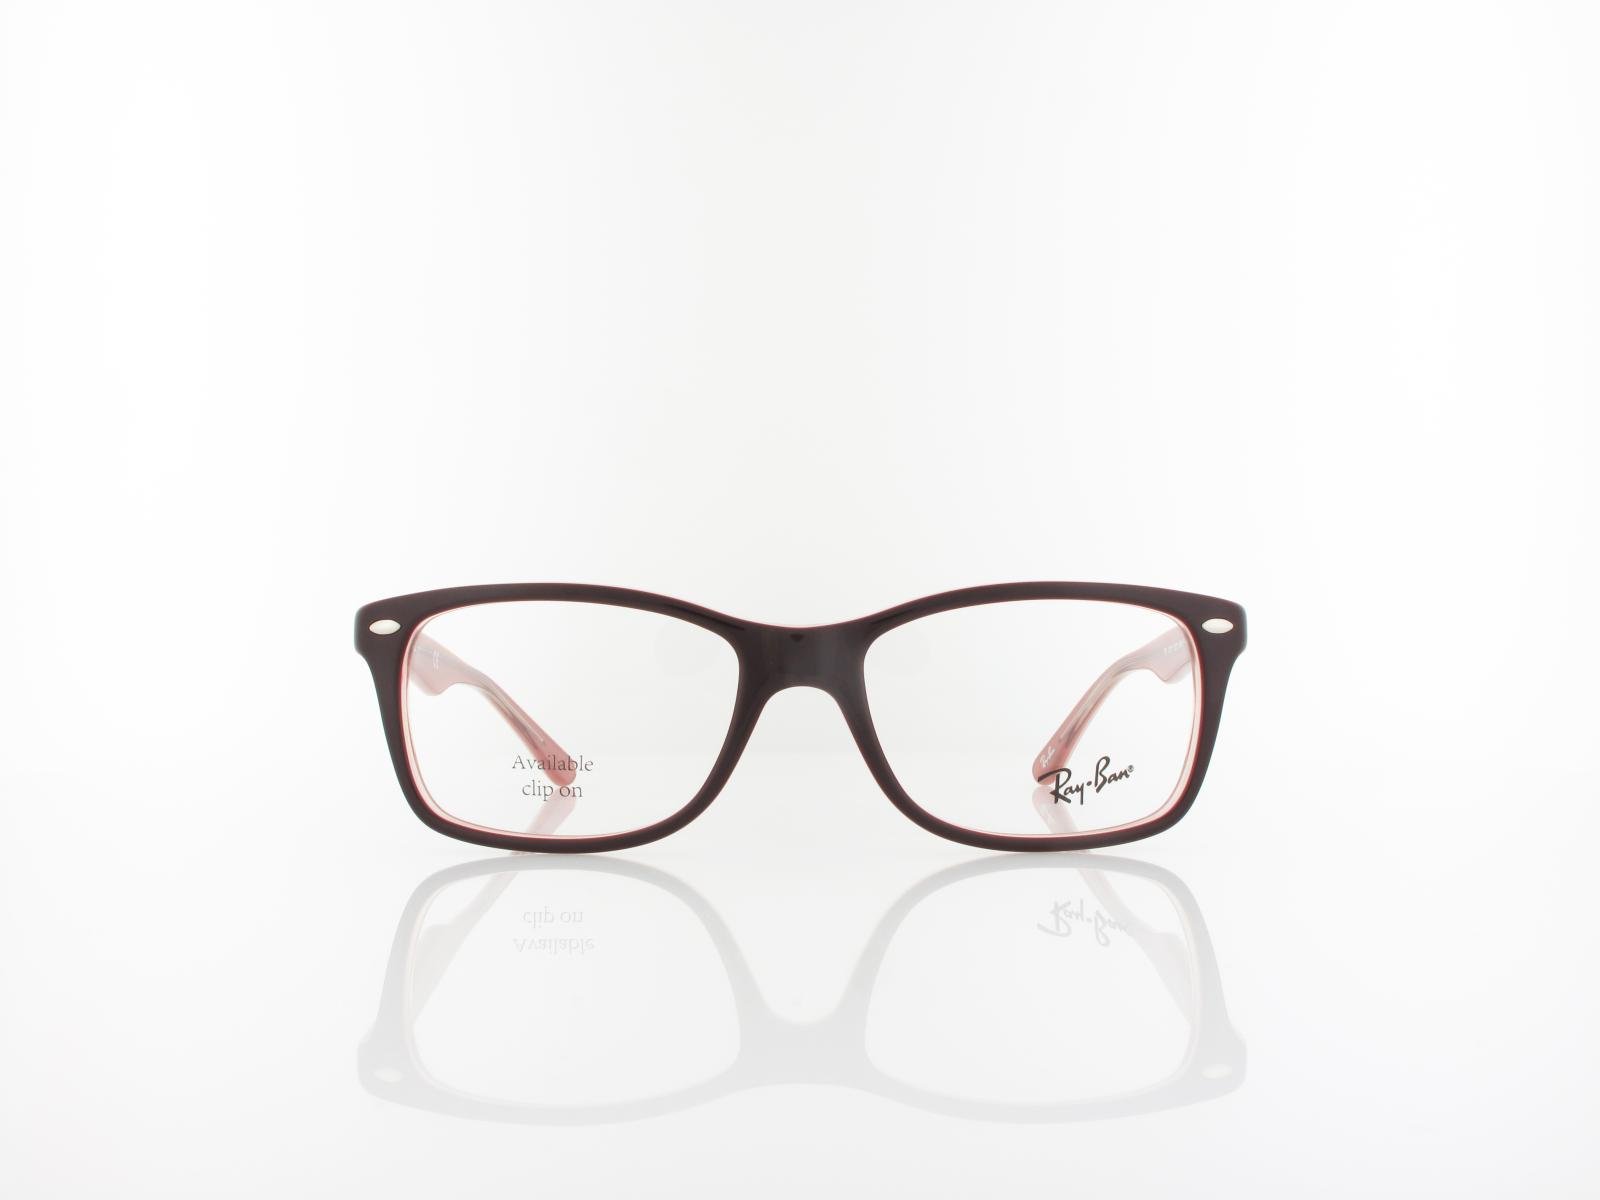 Ray Ban | RX5228 8120 53 | brown on trasparent pink